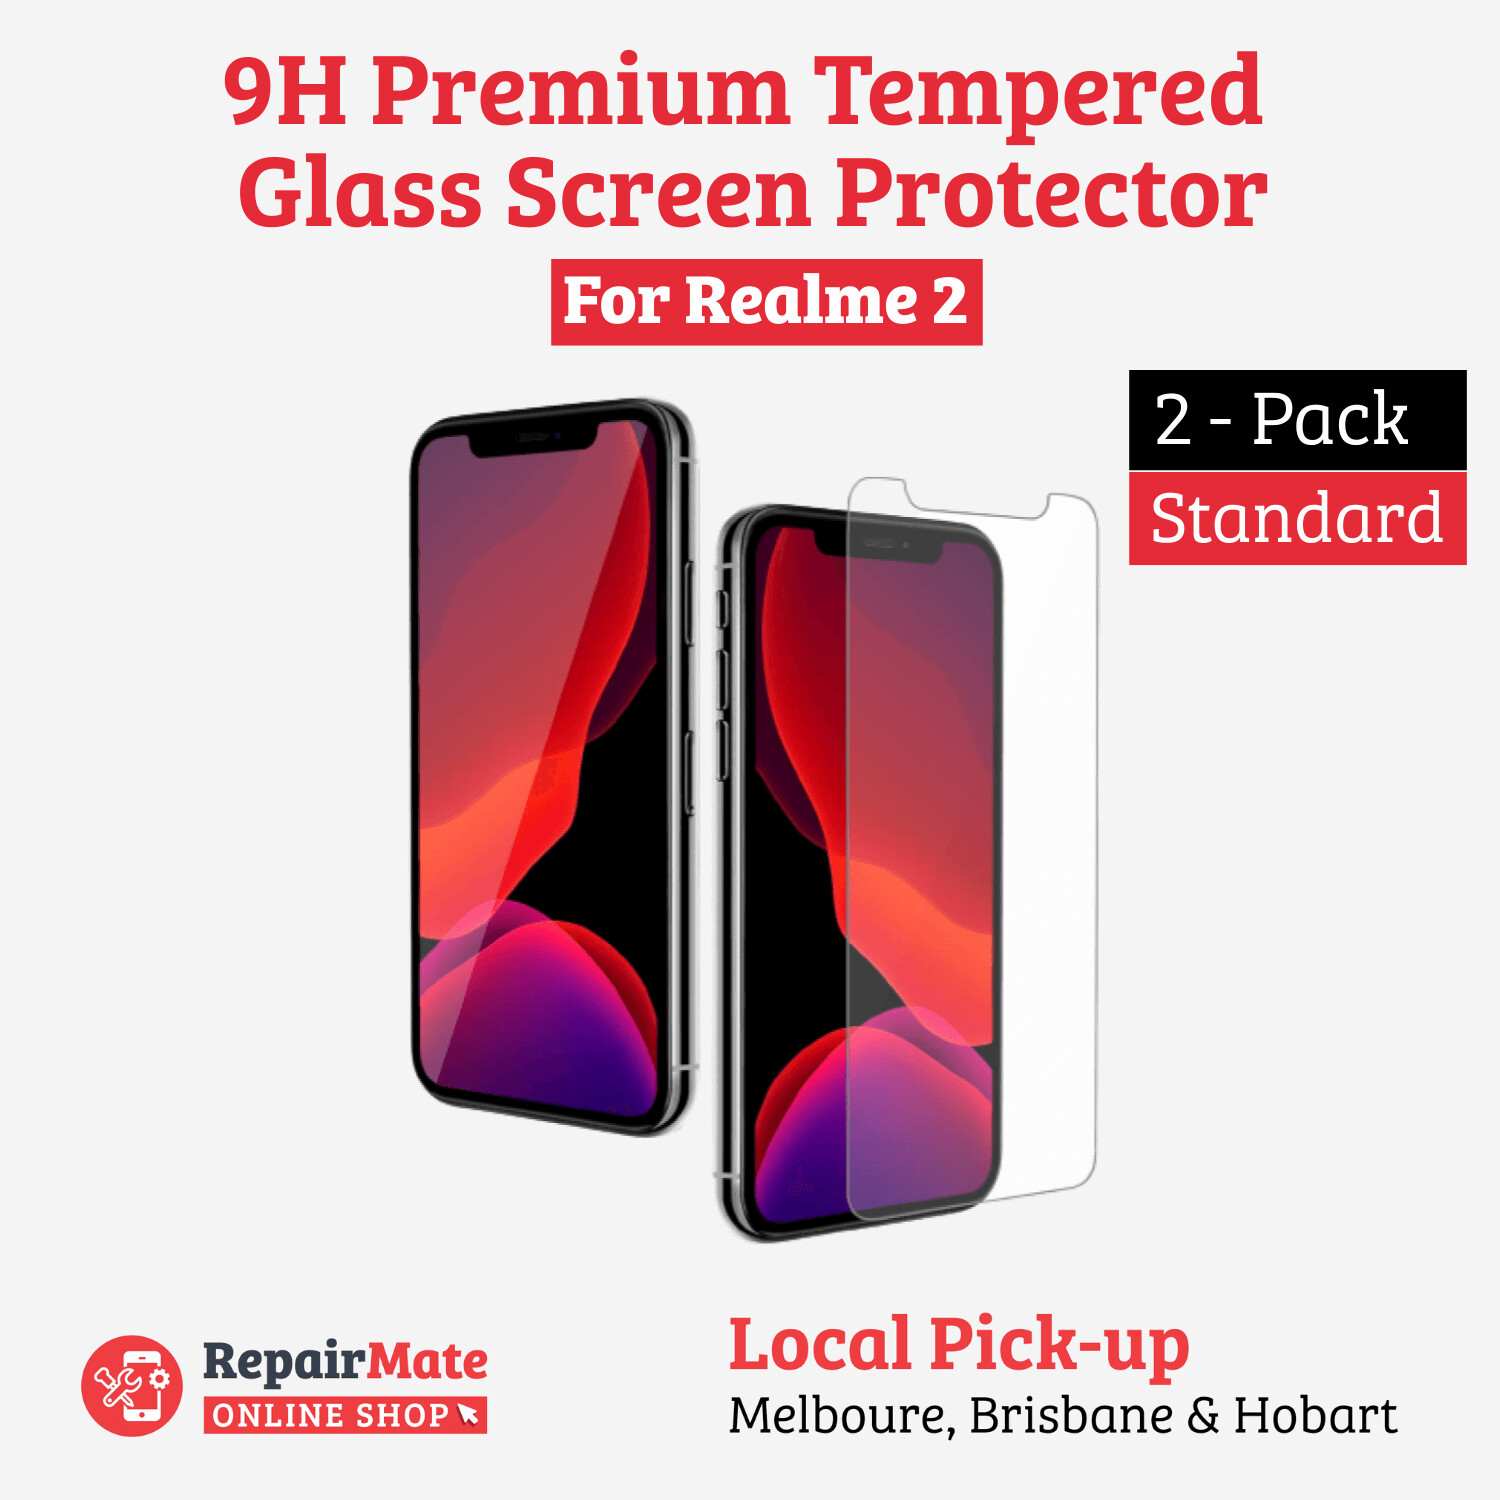 Realme 2 9H Premium Tempered Glass Screen Protector [2 Pack]